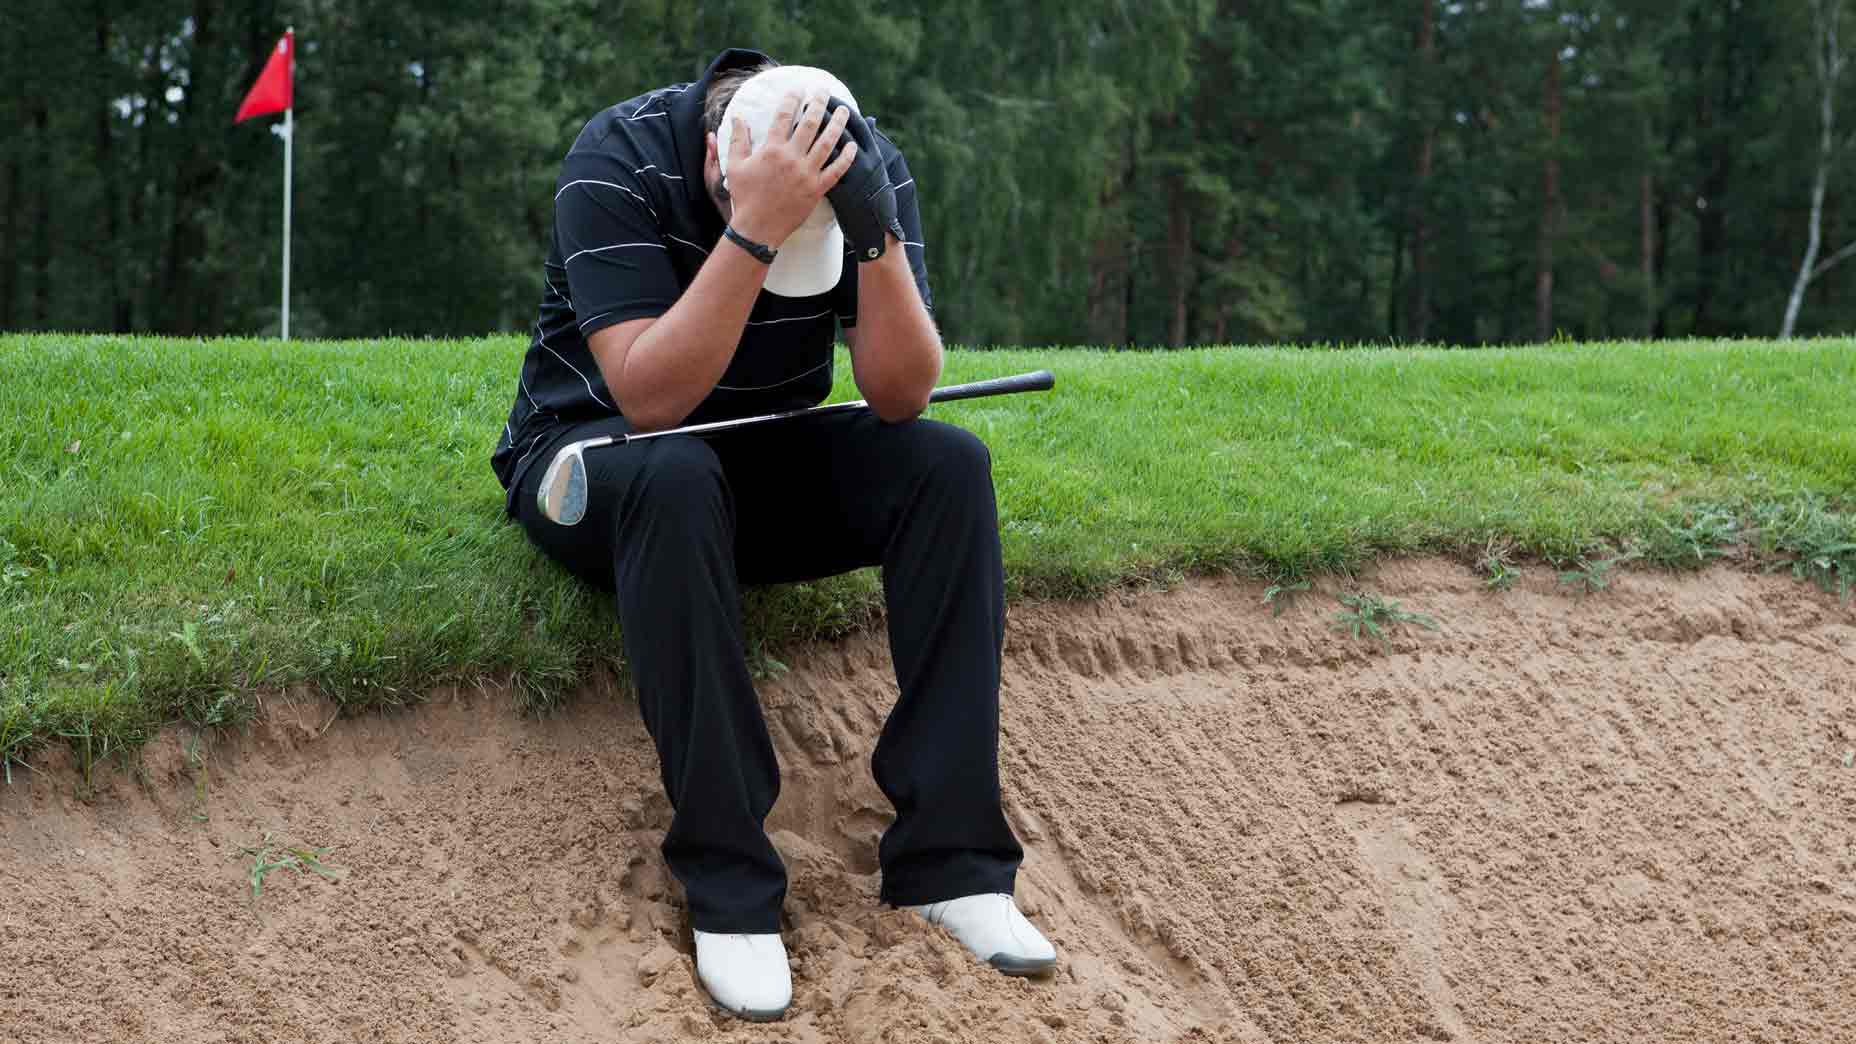 What are the most common mistakes amateur golfers make? According to GOLF Top 100 Teacher Jason Carbone, here's what he sees most often